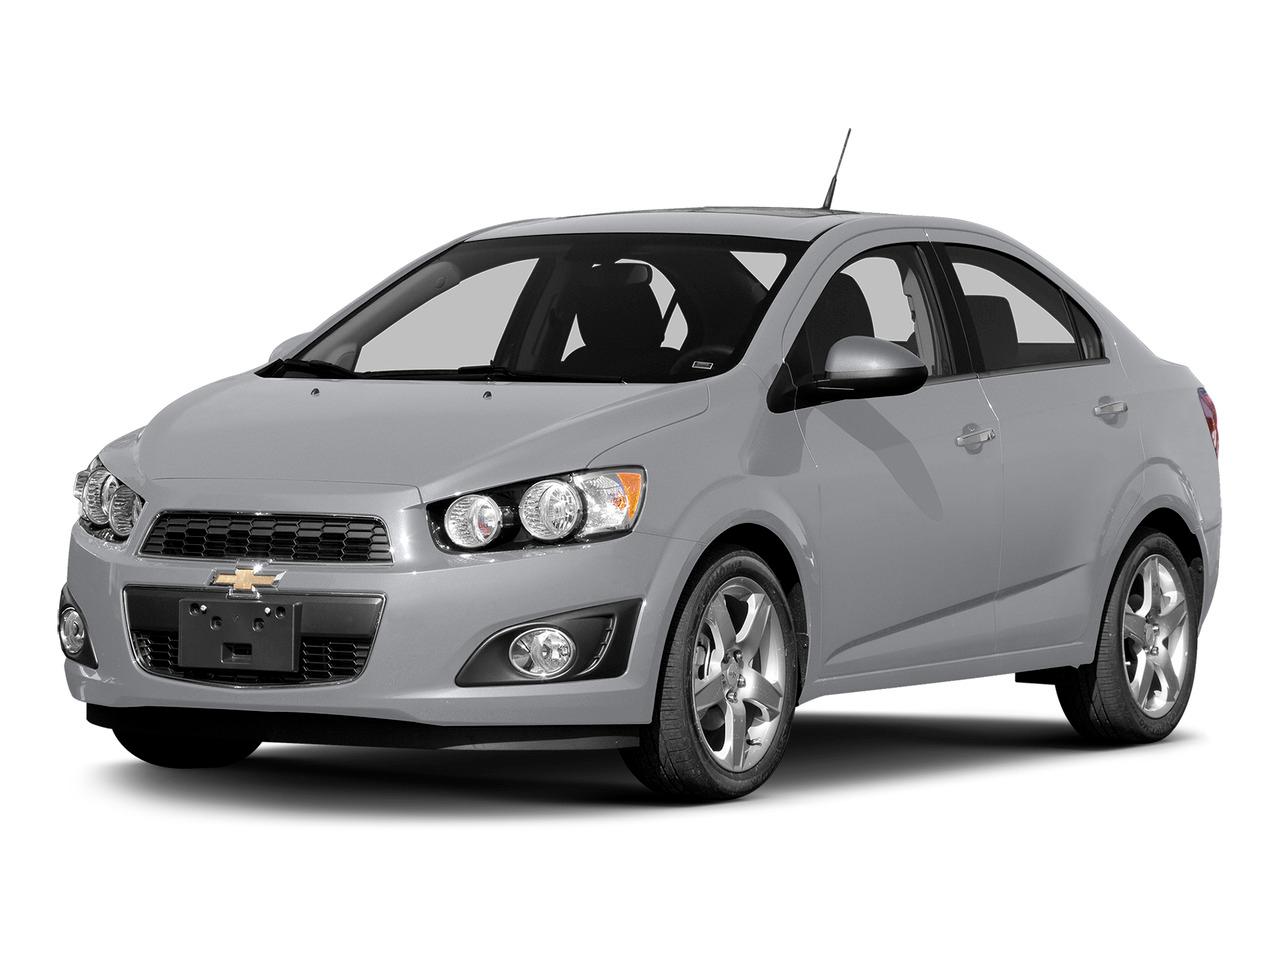 2015 Chevrolet Sonic Vehicle Photo in Plainfield, IL 60586